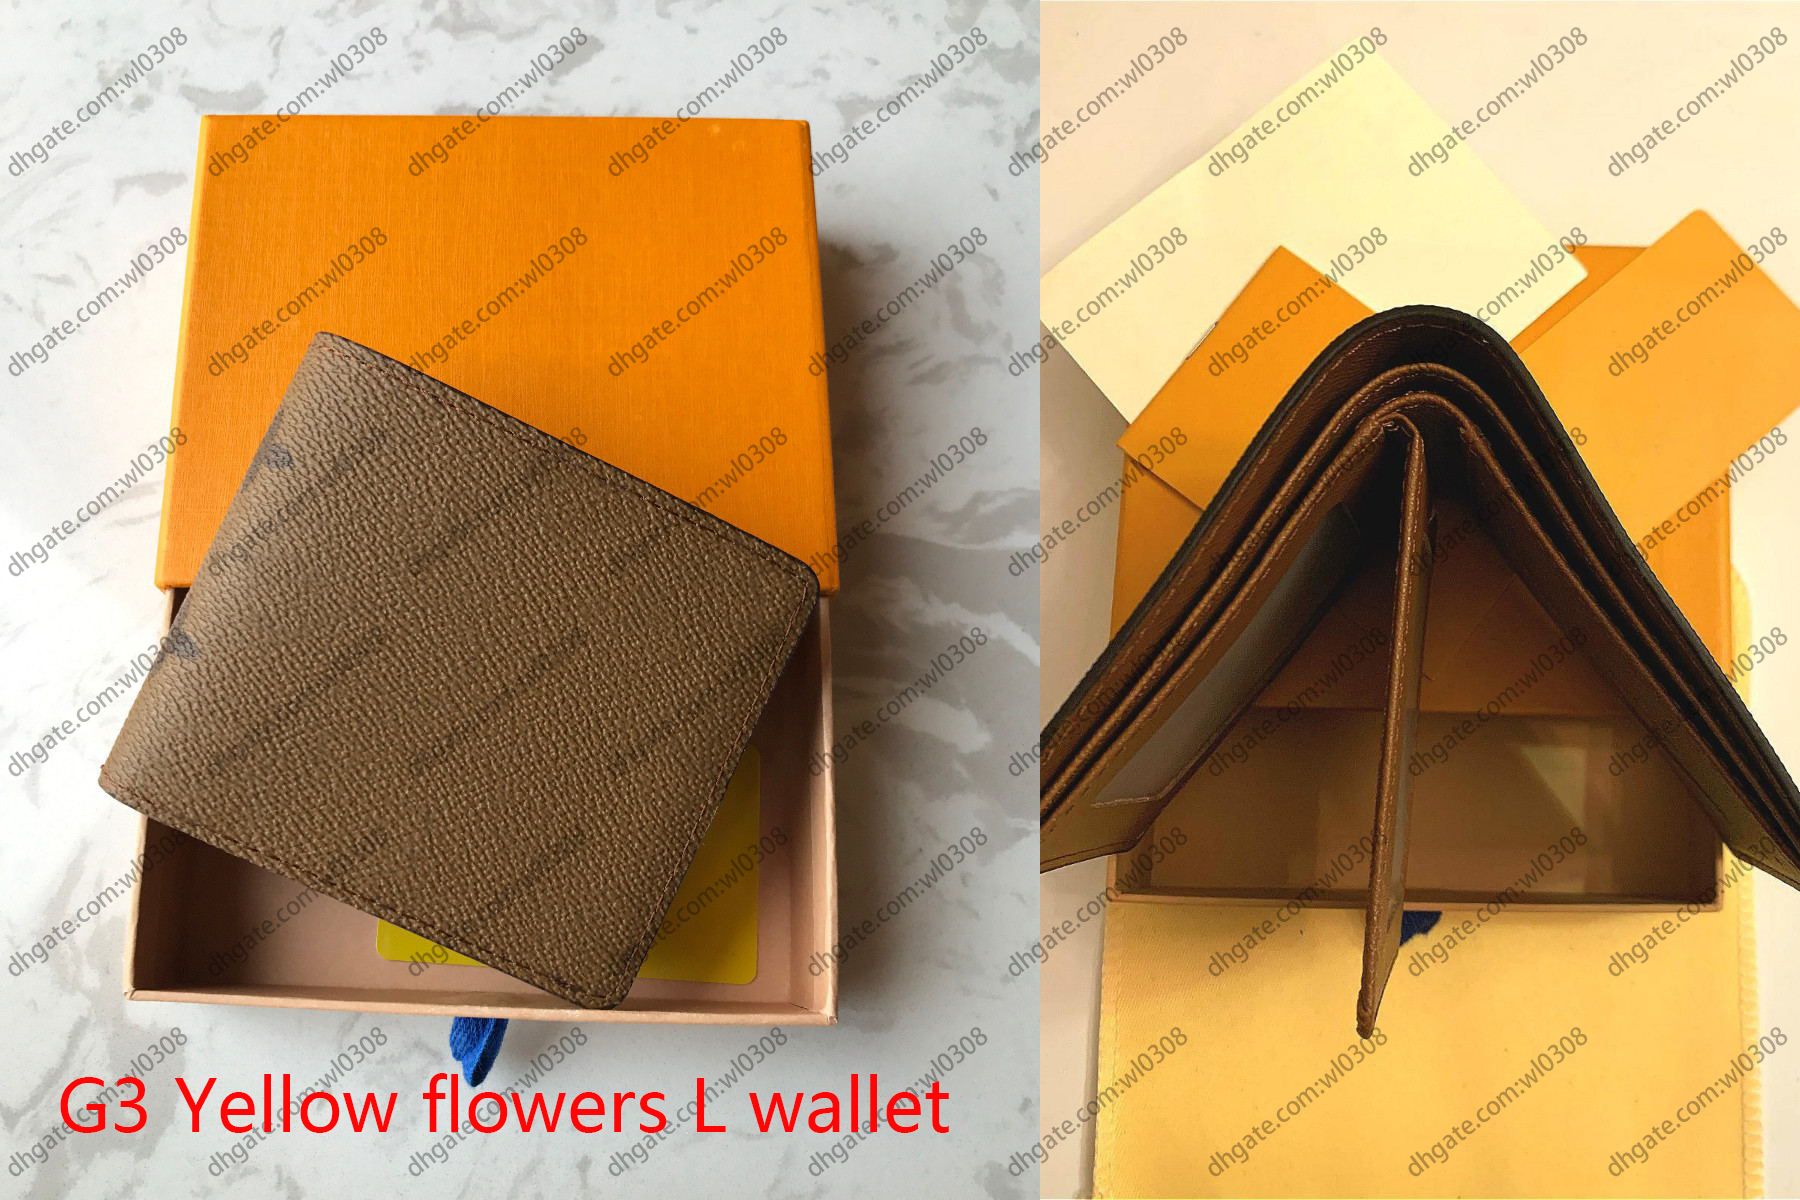 G3 Yellow flowers L wallet